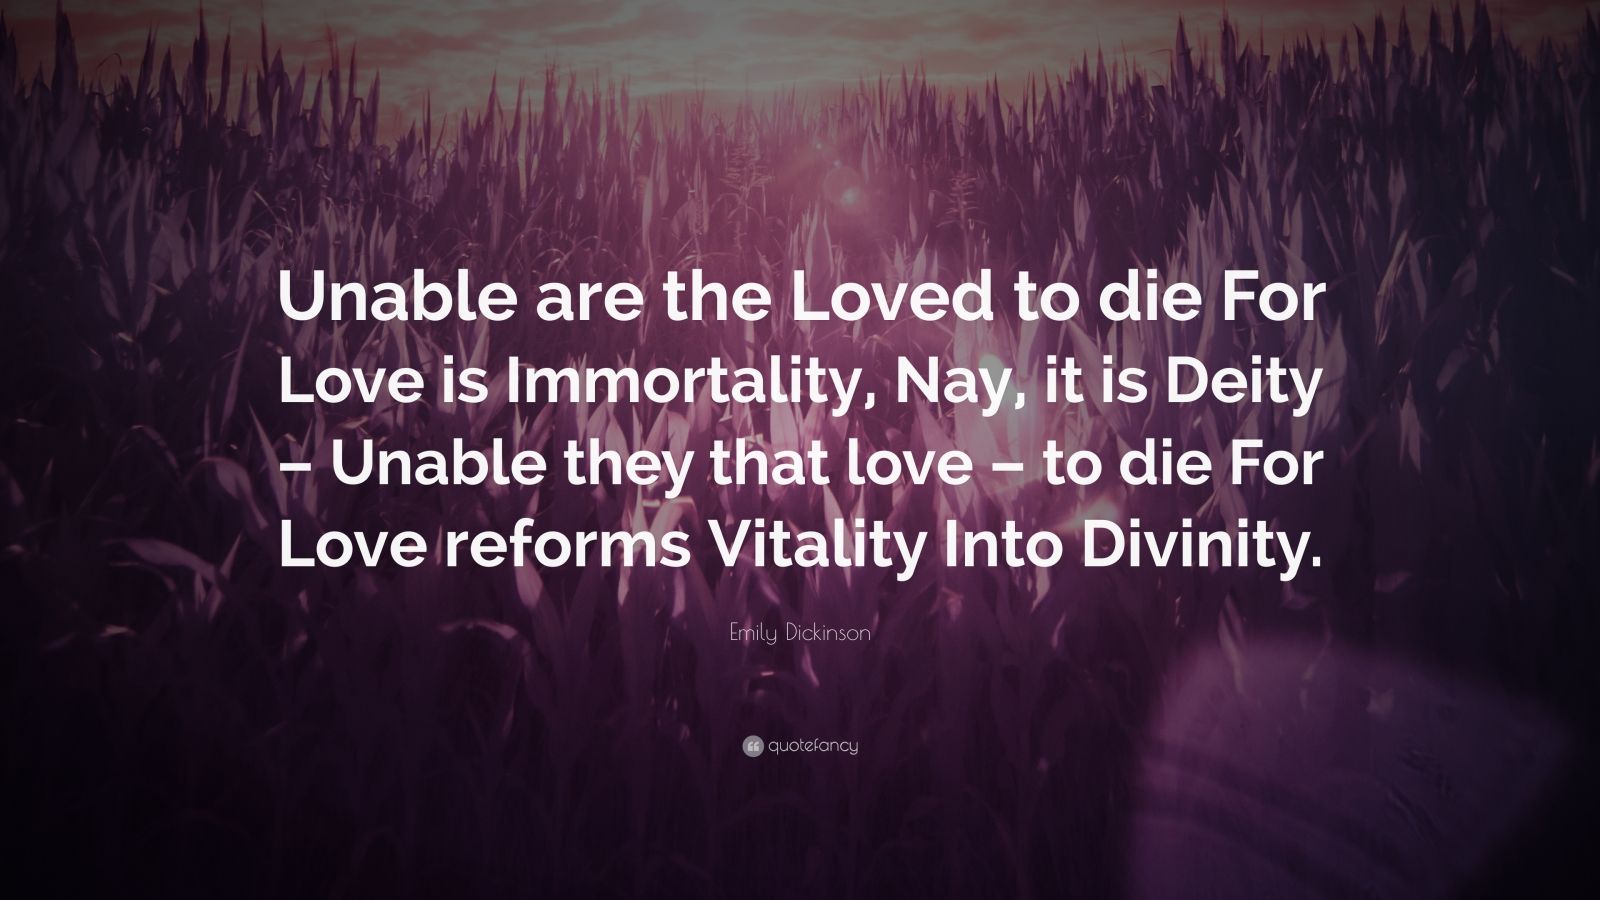 Emily Dickinson Quote: “Unable are the Loved to die For Love is ...